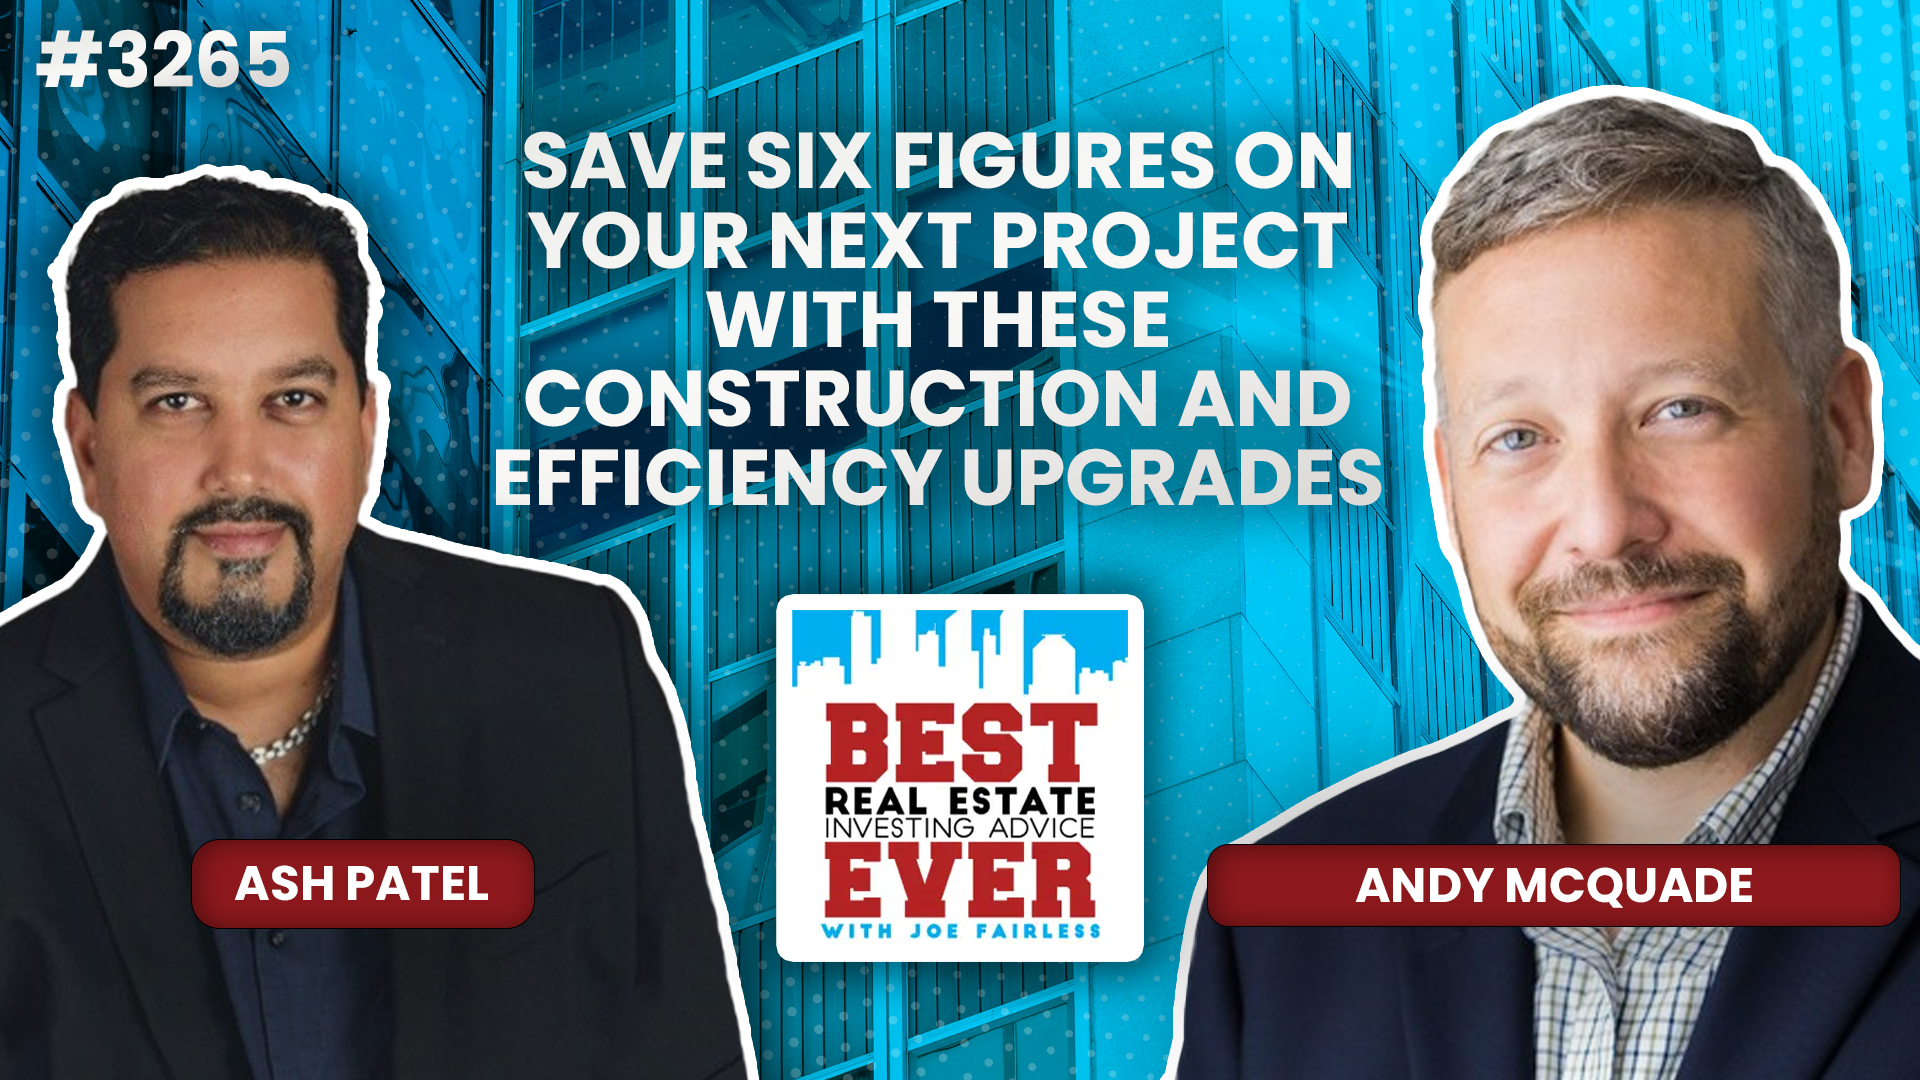 JF3265: Andy McQuade — Save Six Figures on Your Next Project With These Construction and Efficiency Upgrades